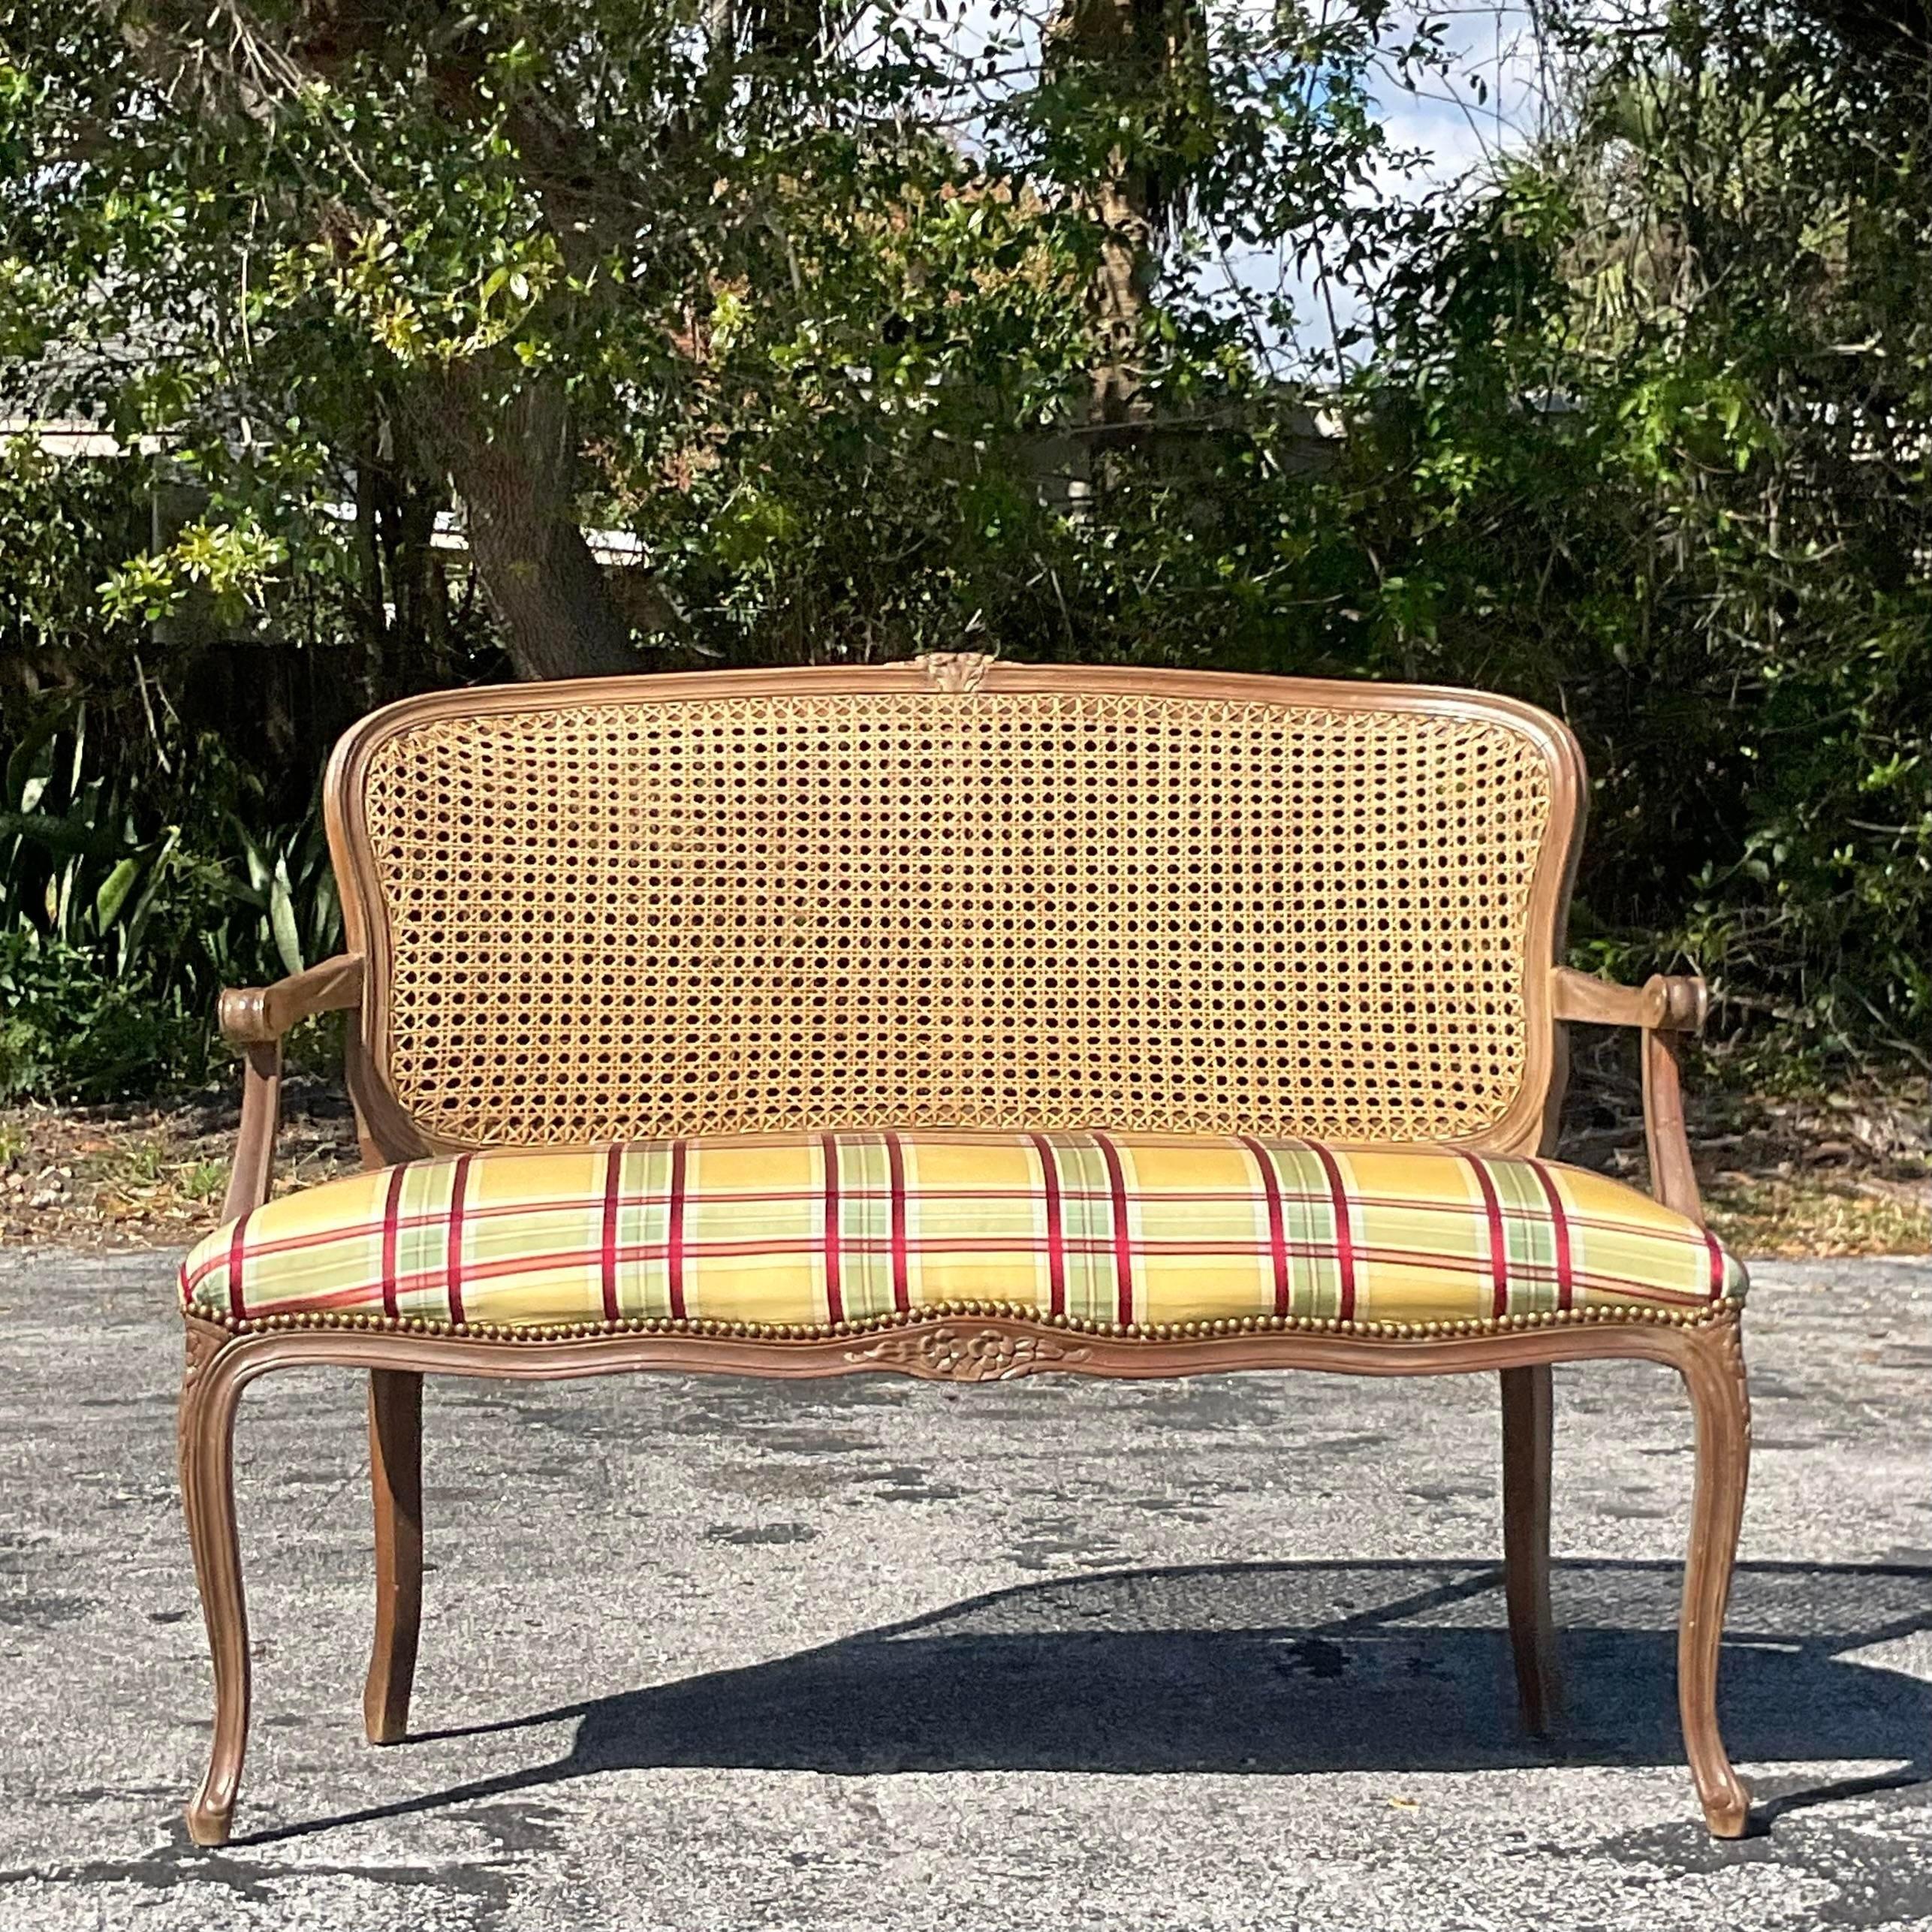 A fabulous vintage Regency settee. A china hand carved frame with amazing attention to detail. An inset cane back with a silk plaid upholstery. Acquired from a Palm Beach estate.